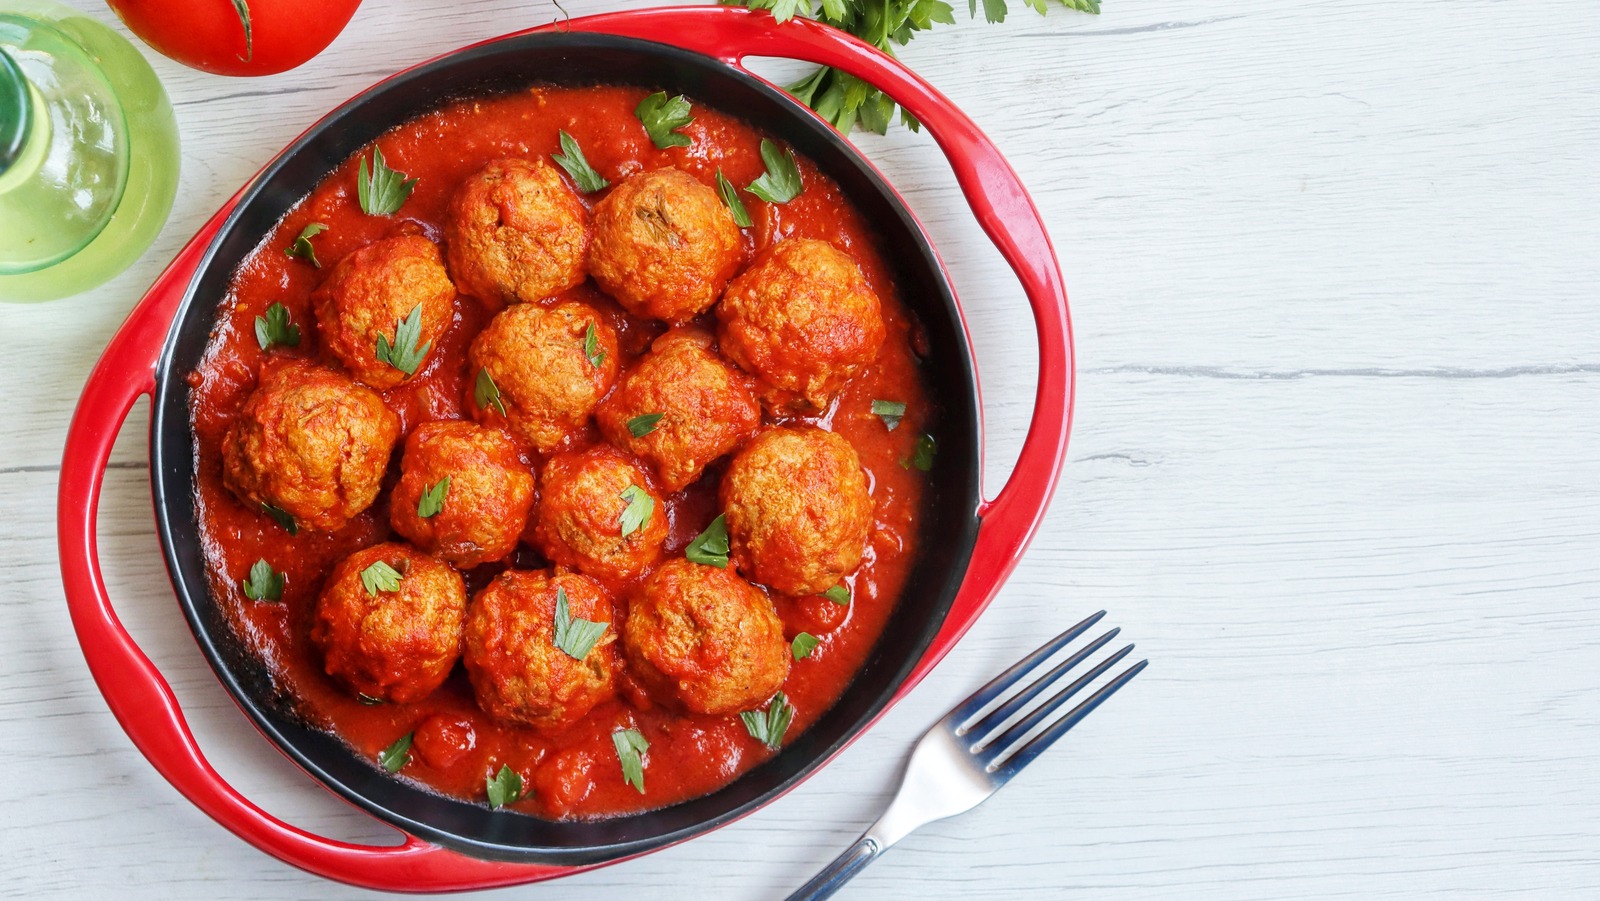 13 Mistakes You Might Be Making With Meatballs